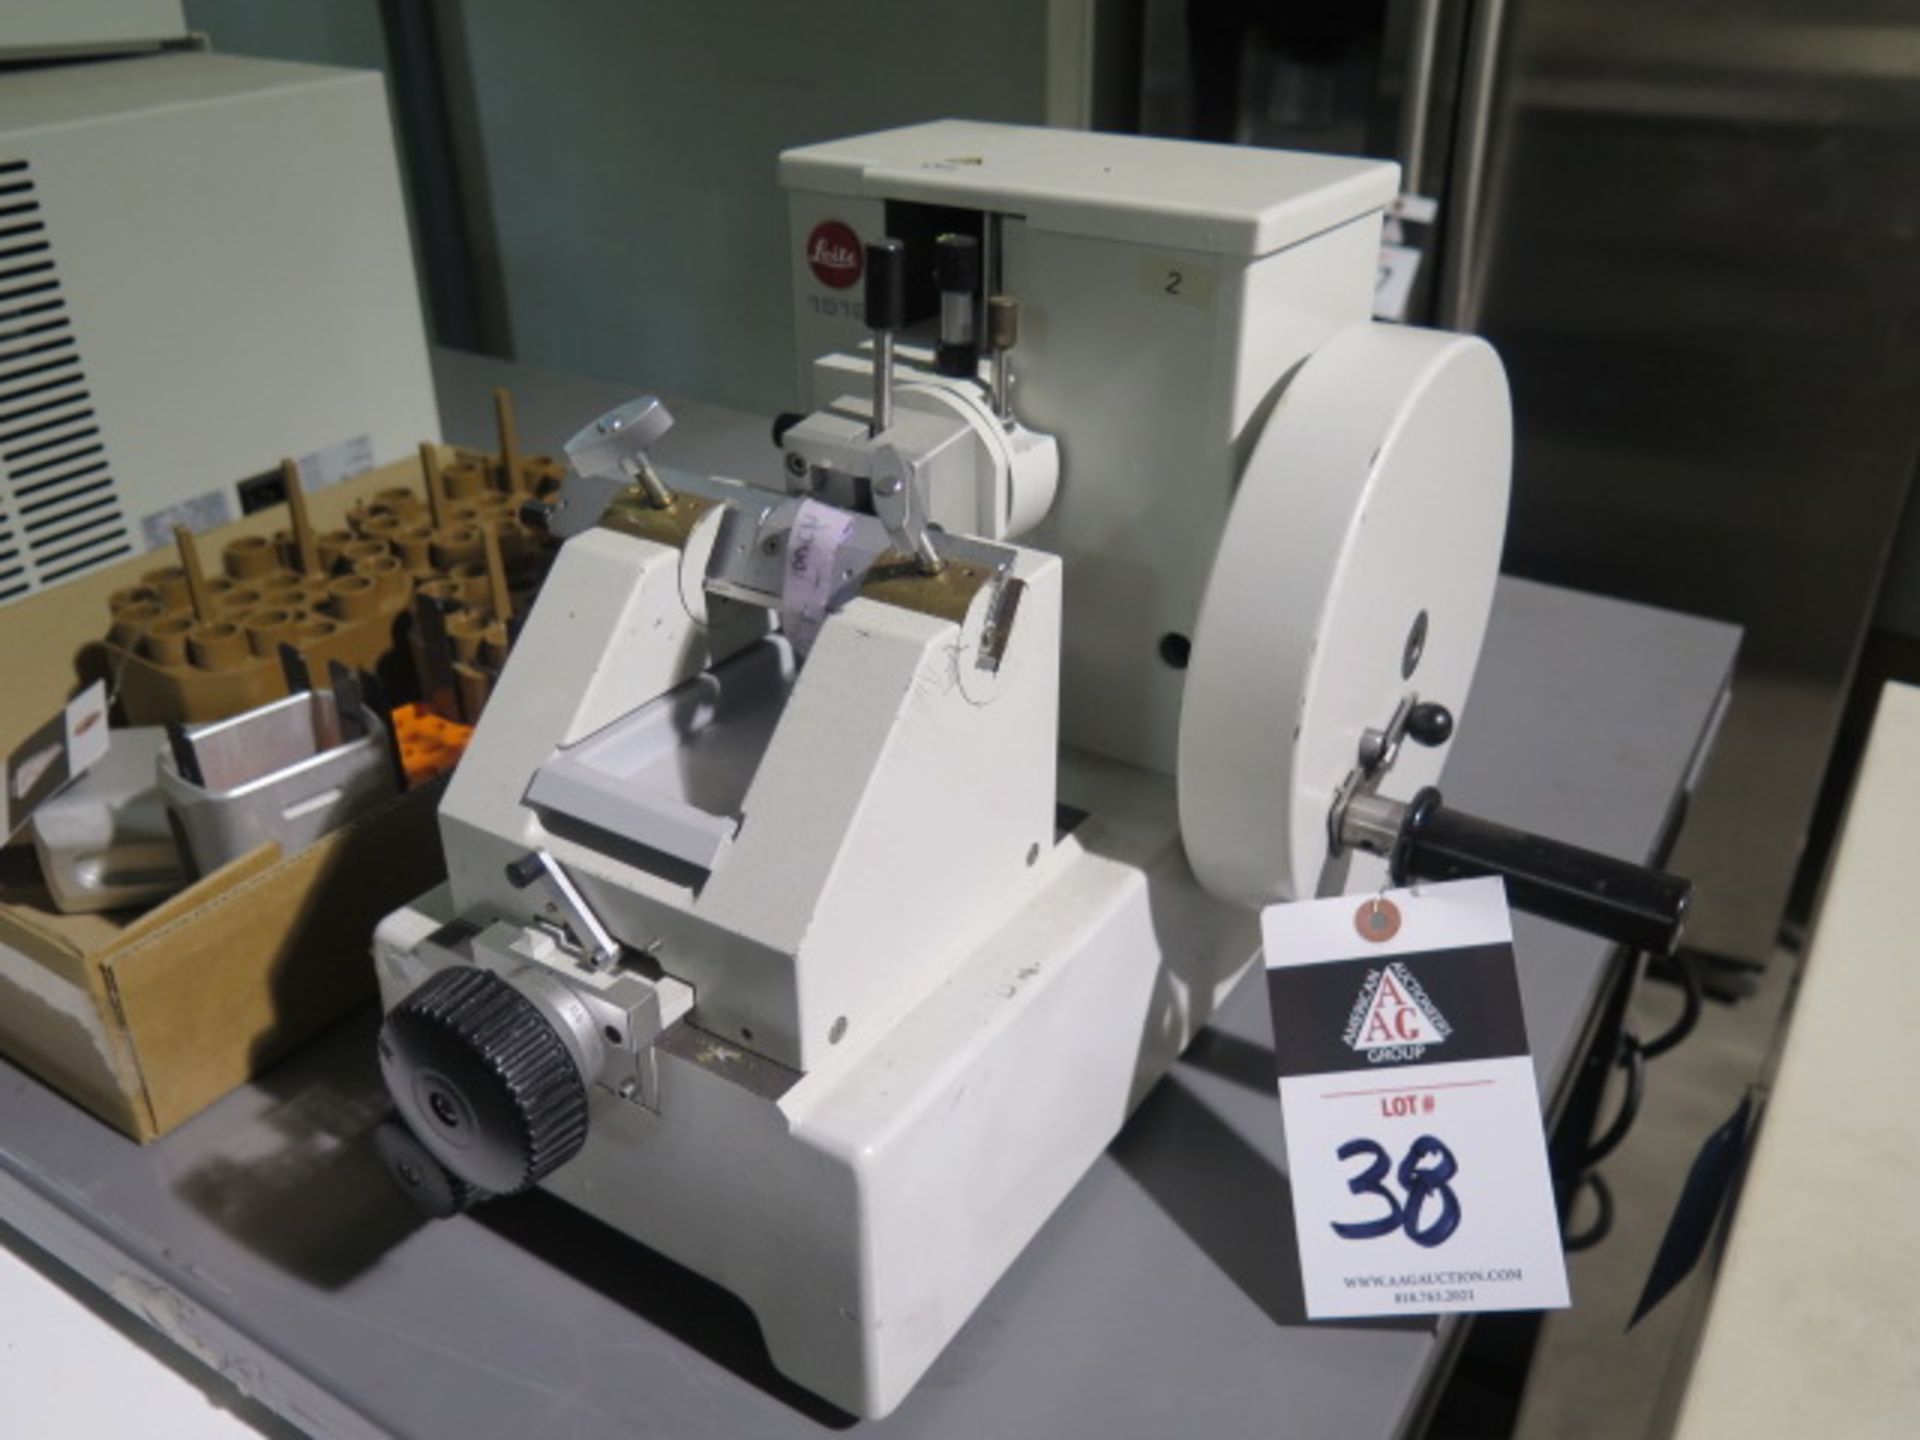 Leitz mdl. 1512 Rotary Microtome (SOLD AS-IS - NO WARRANTY)